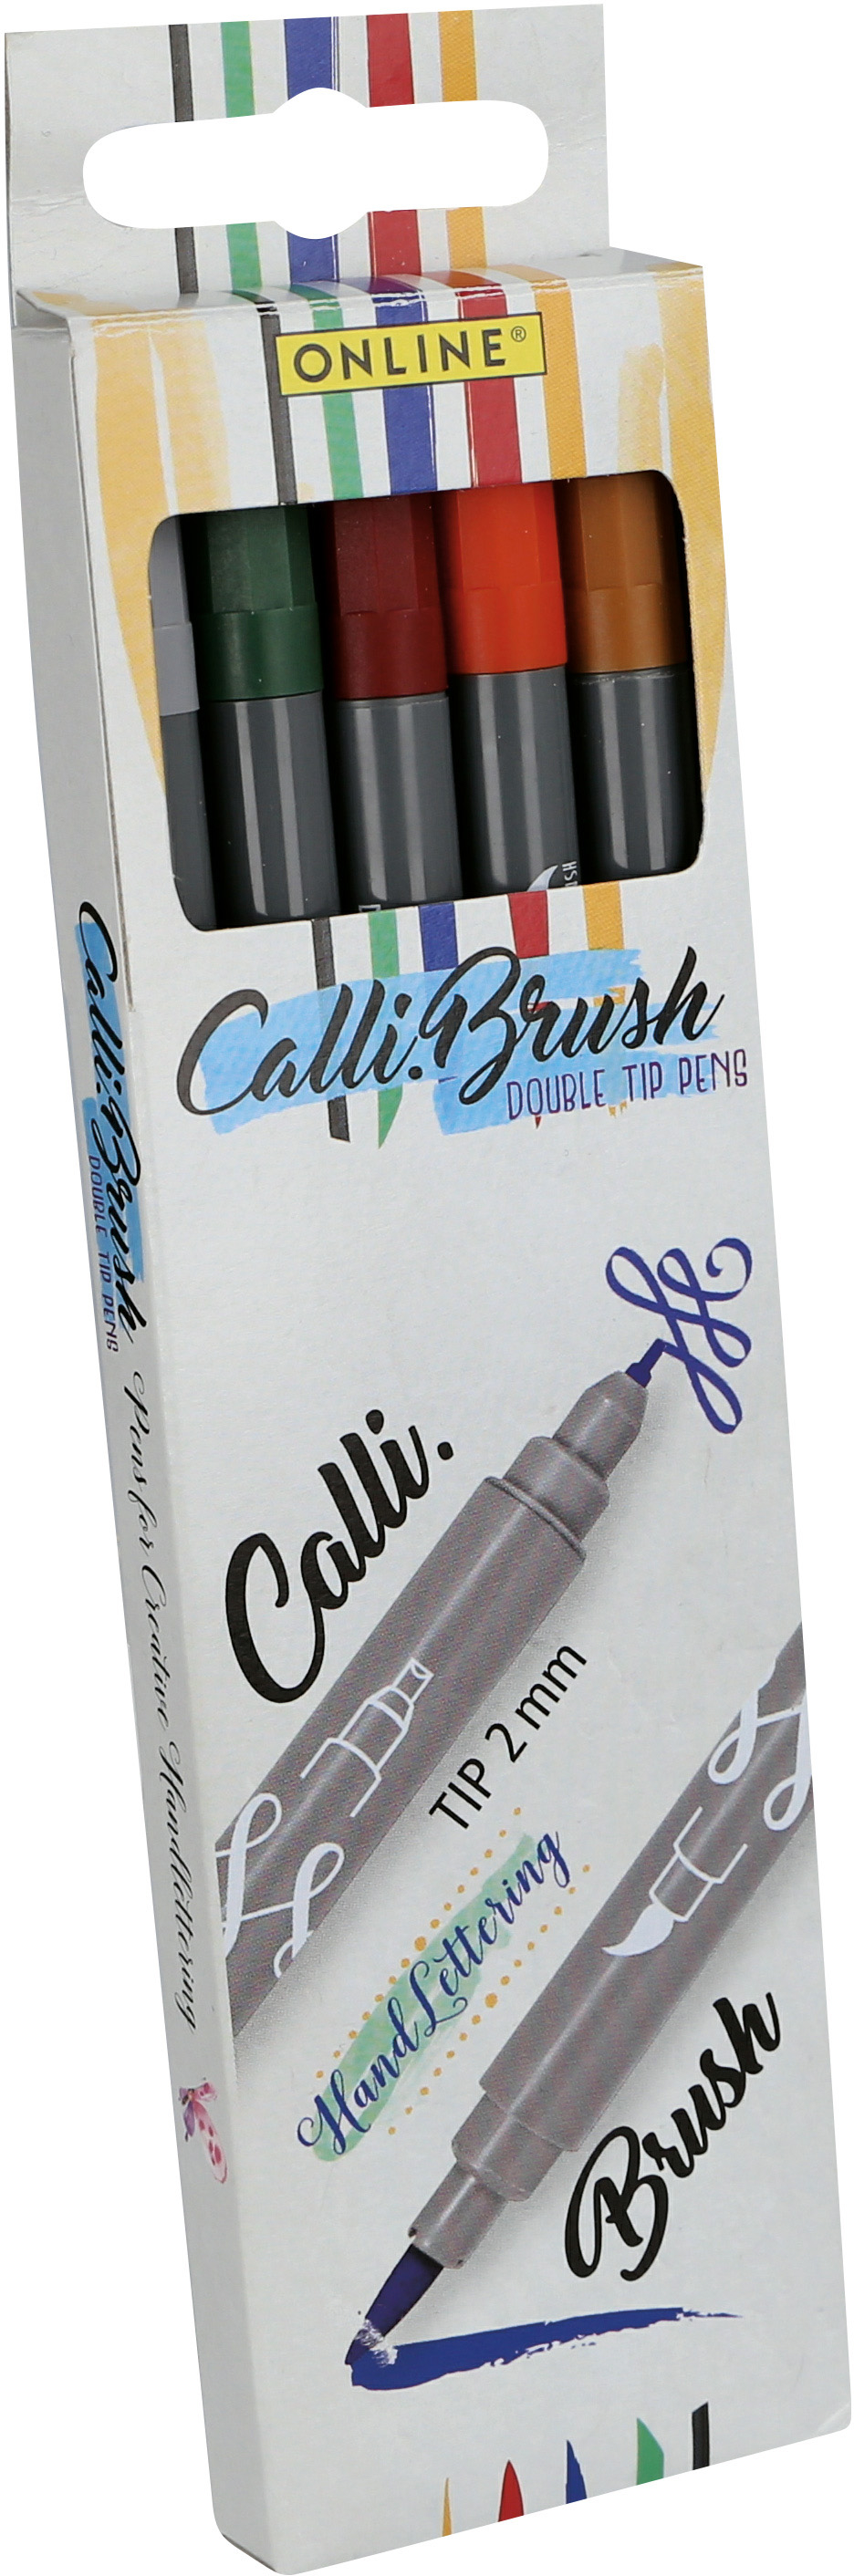 ONLINE Calli Brush Nature 19133 5 couleurs Double Tip, 2mm